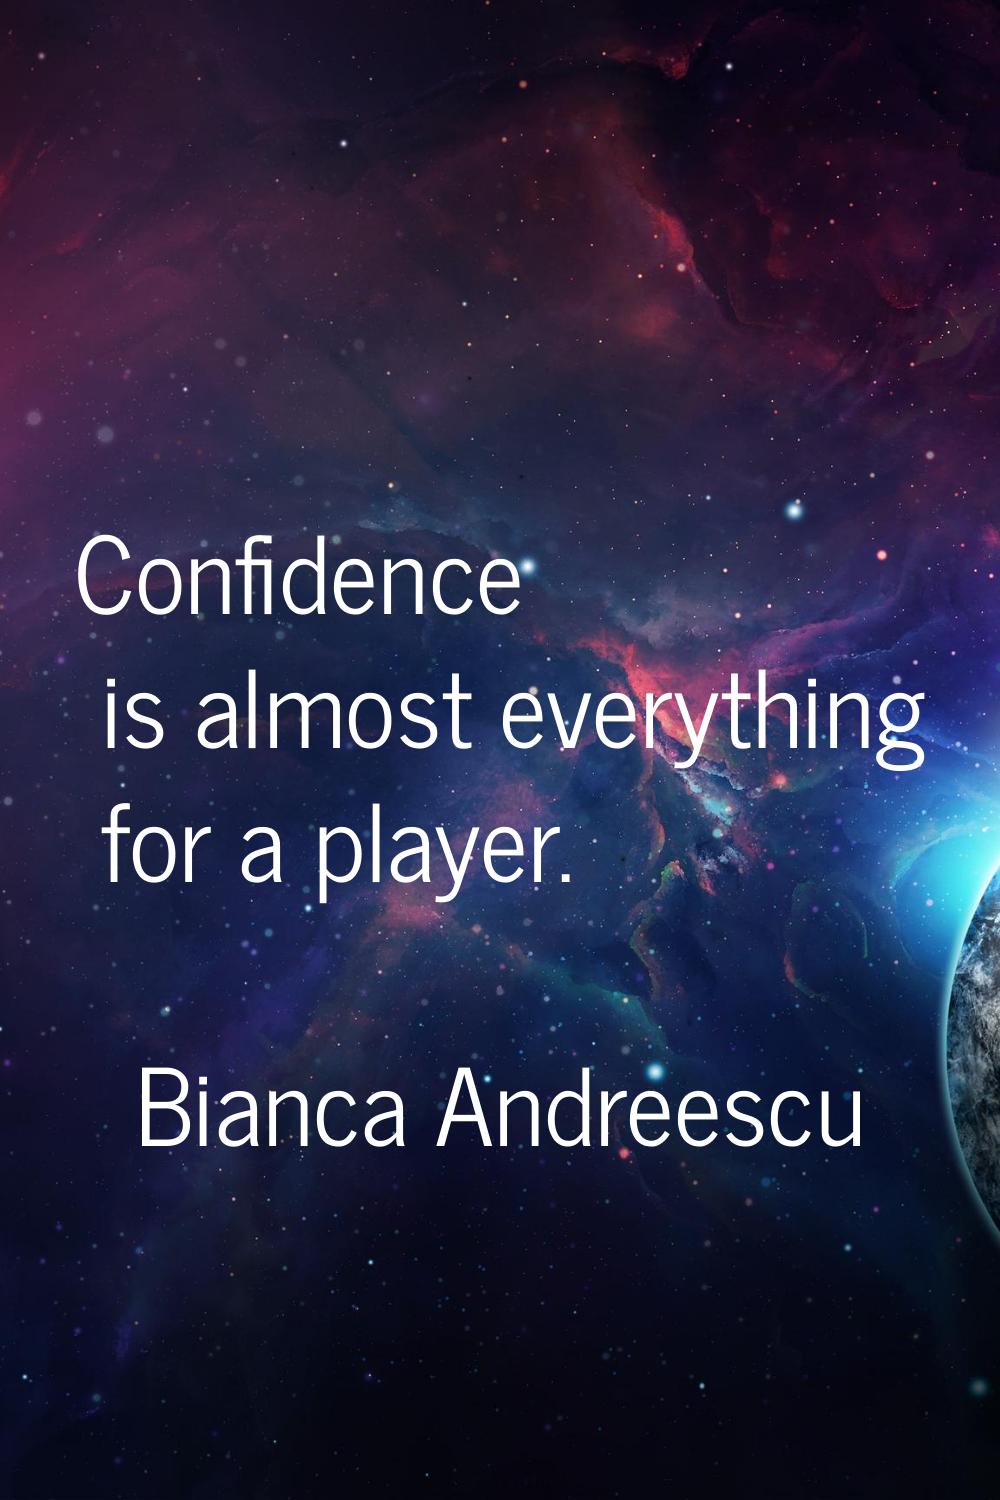 Confidence is almost everything for a player.